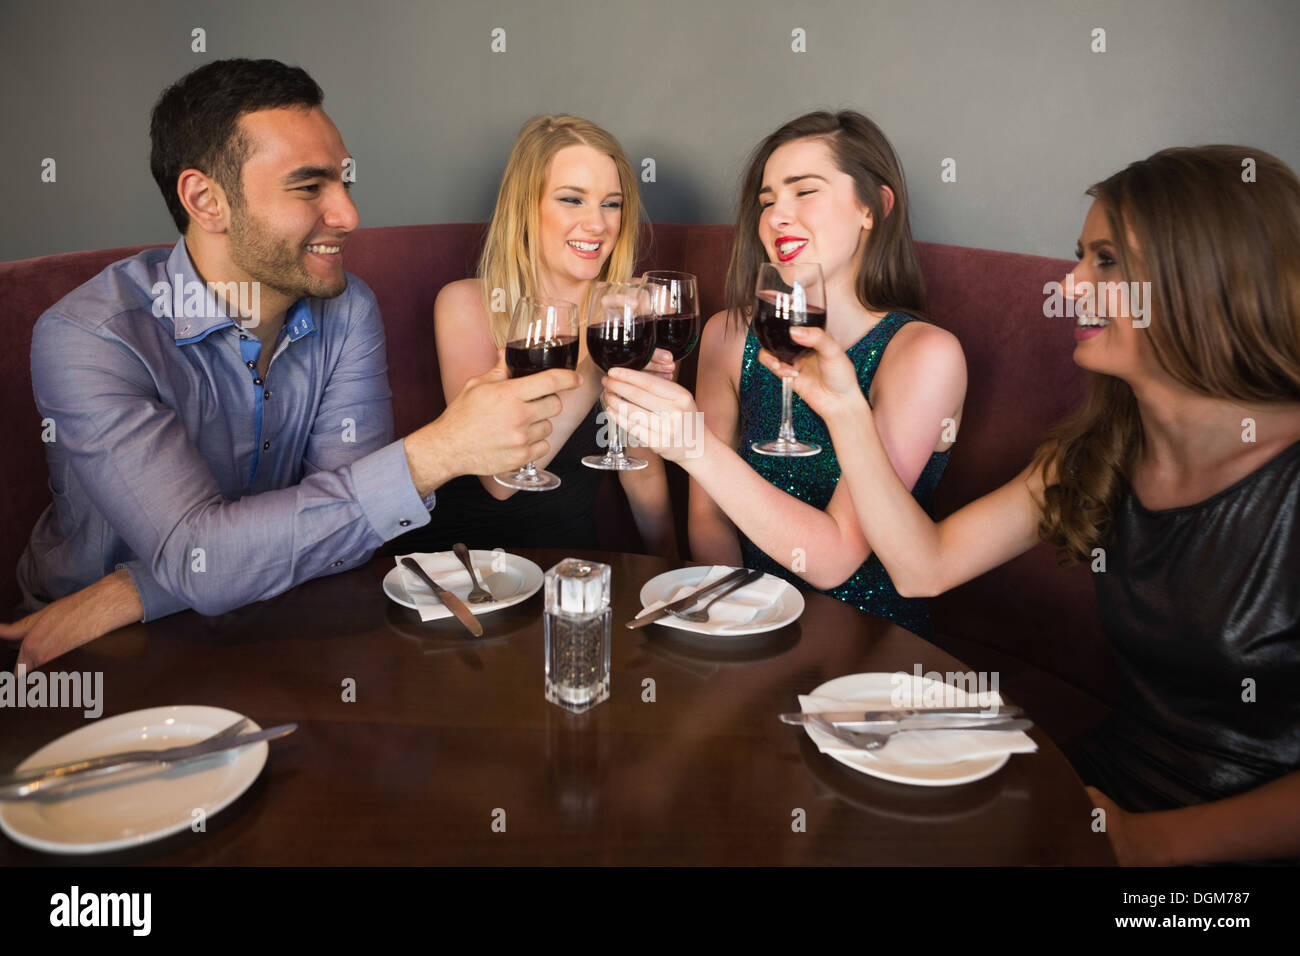 Laughing friends sitting together clinking glasses Stock Photo